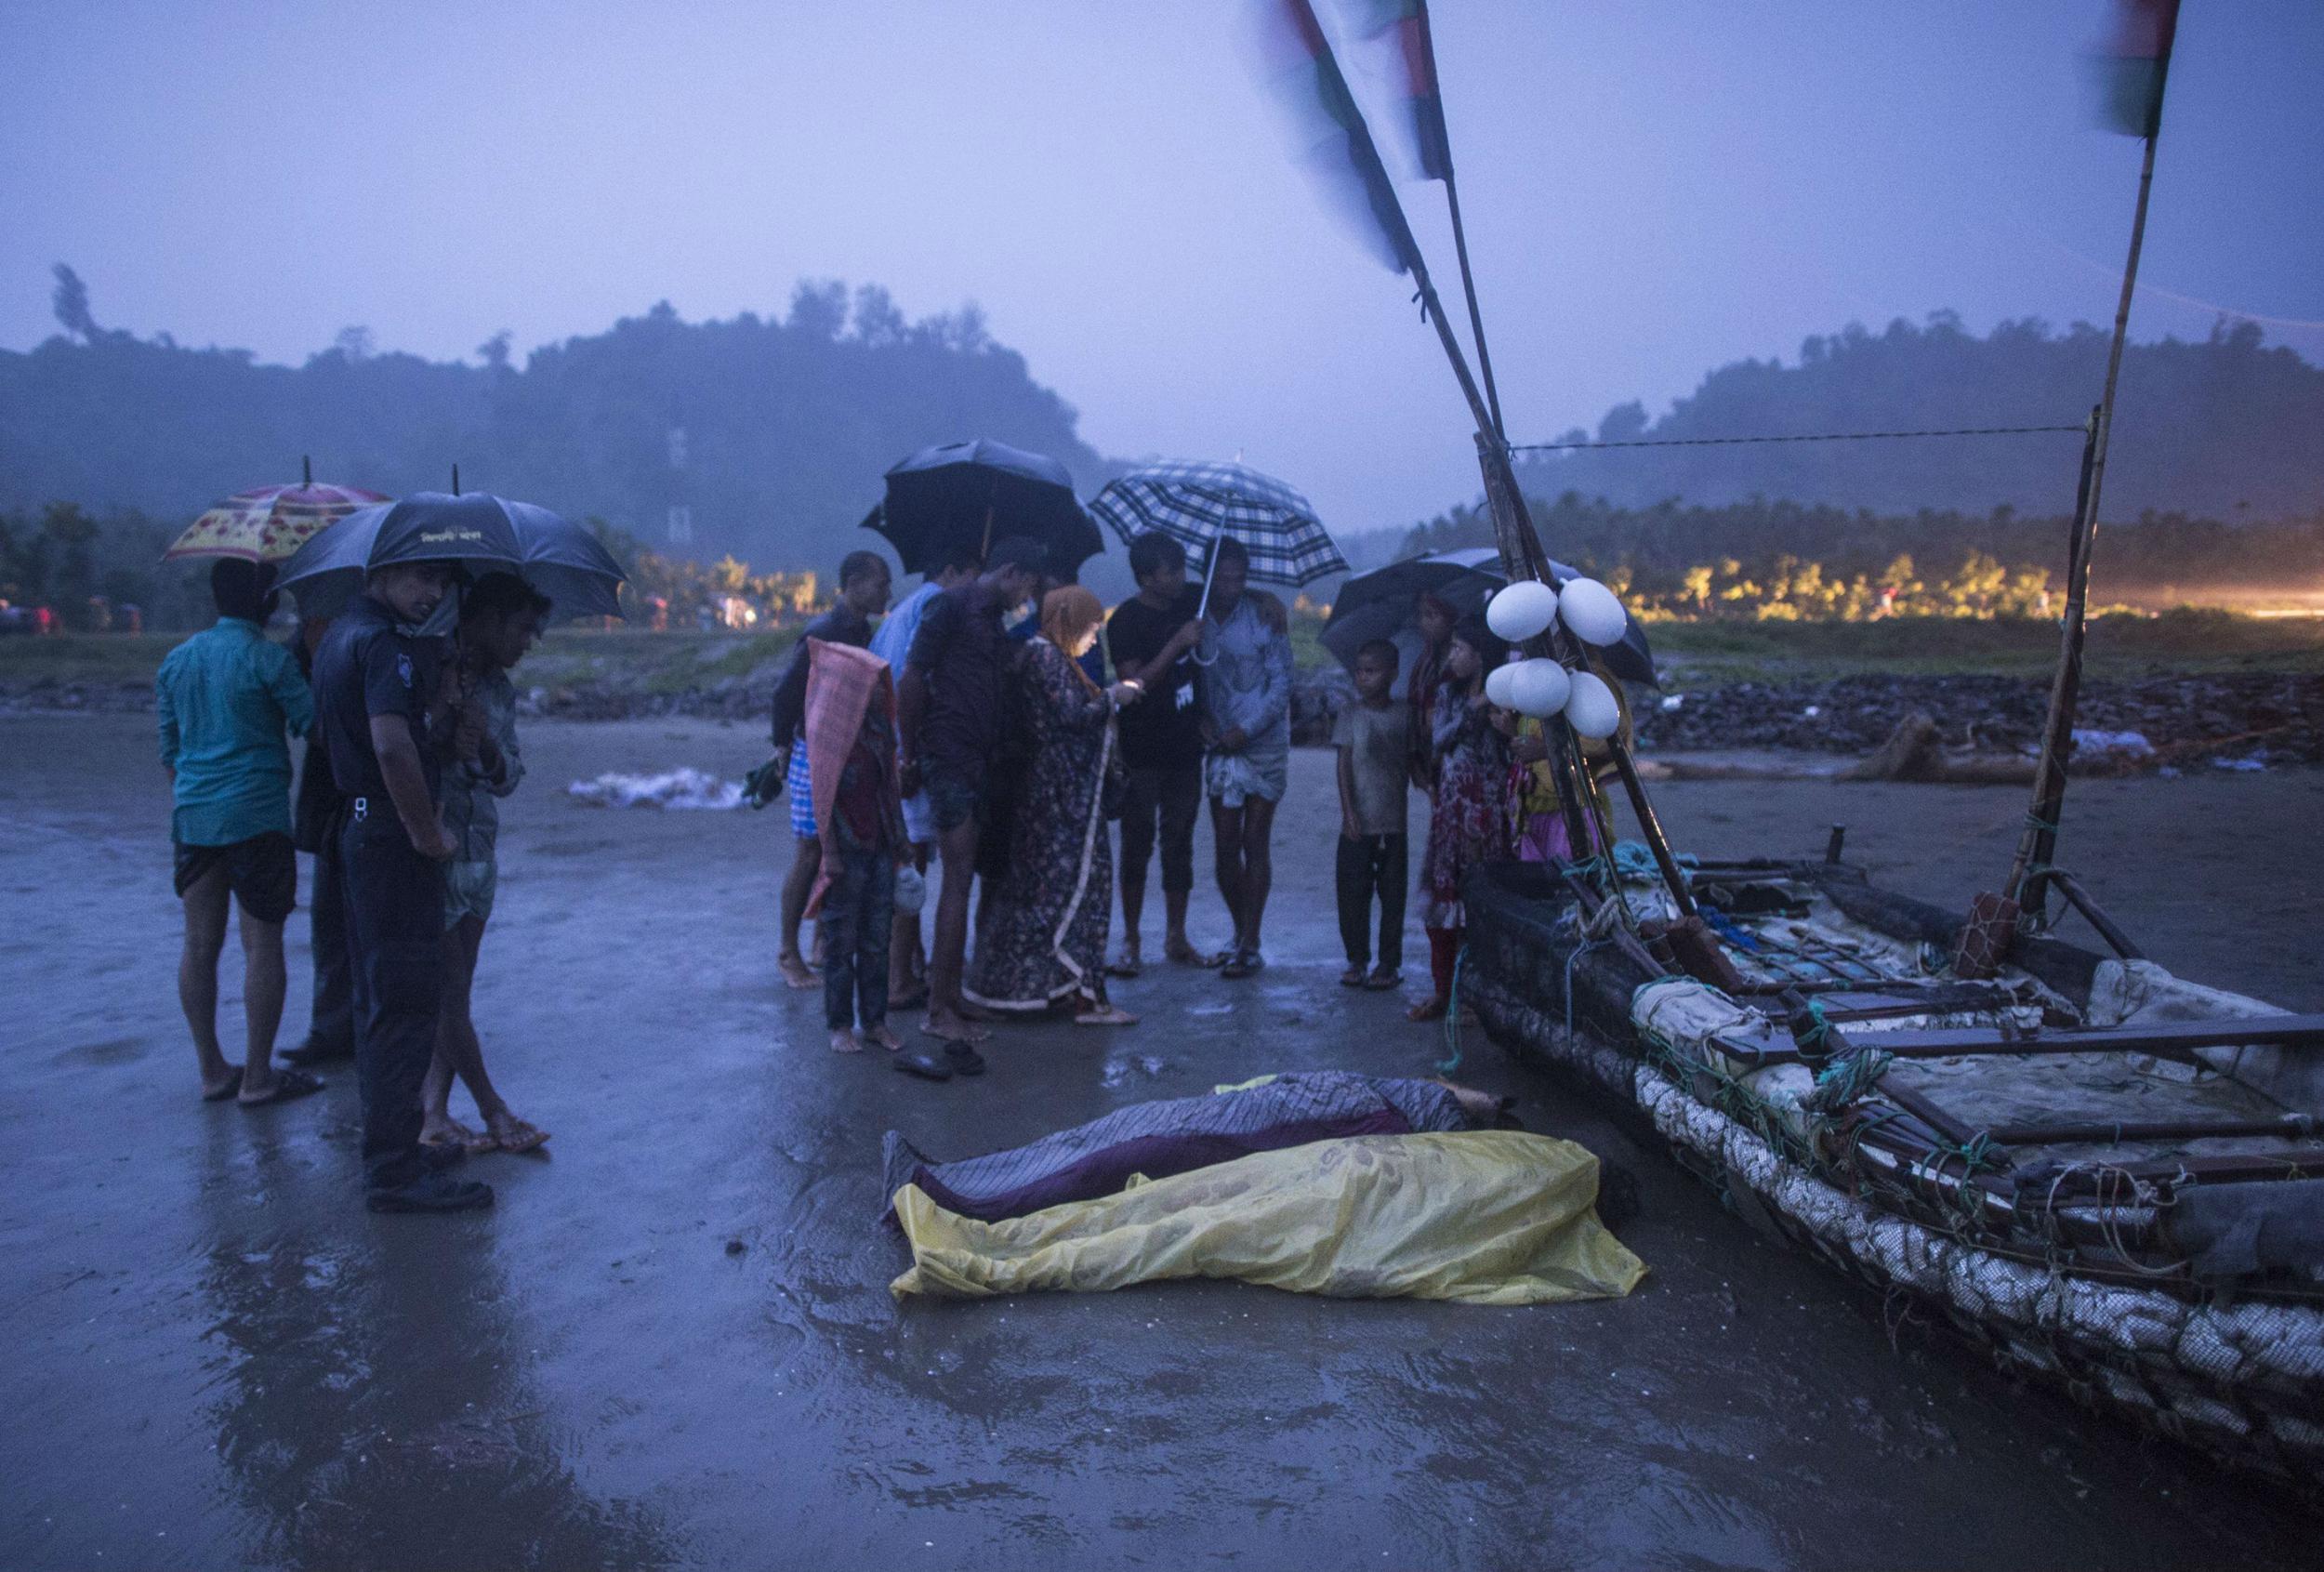 At least 14 people were killed, including ten children, after a boat containing Rohingya refugees capsized